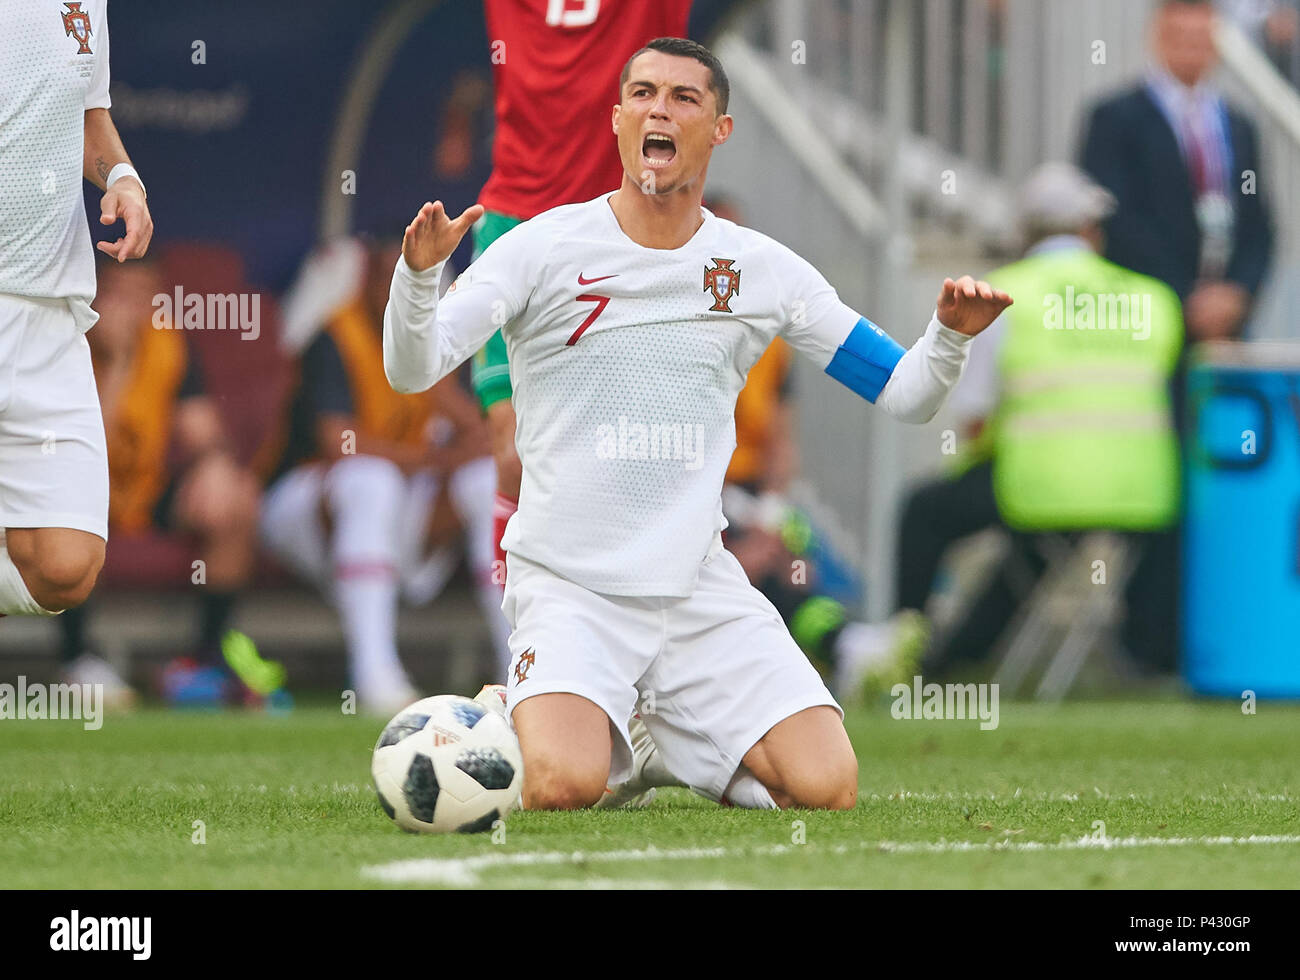 Moscow, Russia. 20th June, 2018. Portugal - Morocco, Soccer, Moscow, June 20, 2018 Foul of Mehdi BENATIA, Morocco Nr.5 at Cristiano RONALDO, Por 7 Emotions, feelings, reaction, anger, furious, scream, rage, action, aggressive, aggression,  PORTUGAL - MOROCCO 1-0 FIFA WORLD CUP 2018 RUSSIA, Group stage , Season 2018/2019,  June 20, 2018 L u z h n i k i Stadium in Moscow, Russia.  © Peter Schatz / Alamy Live News Credit: Peter Schatz/Alamy Live News Stock Photo